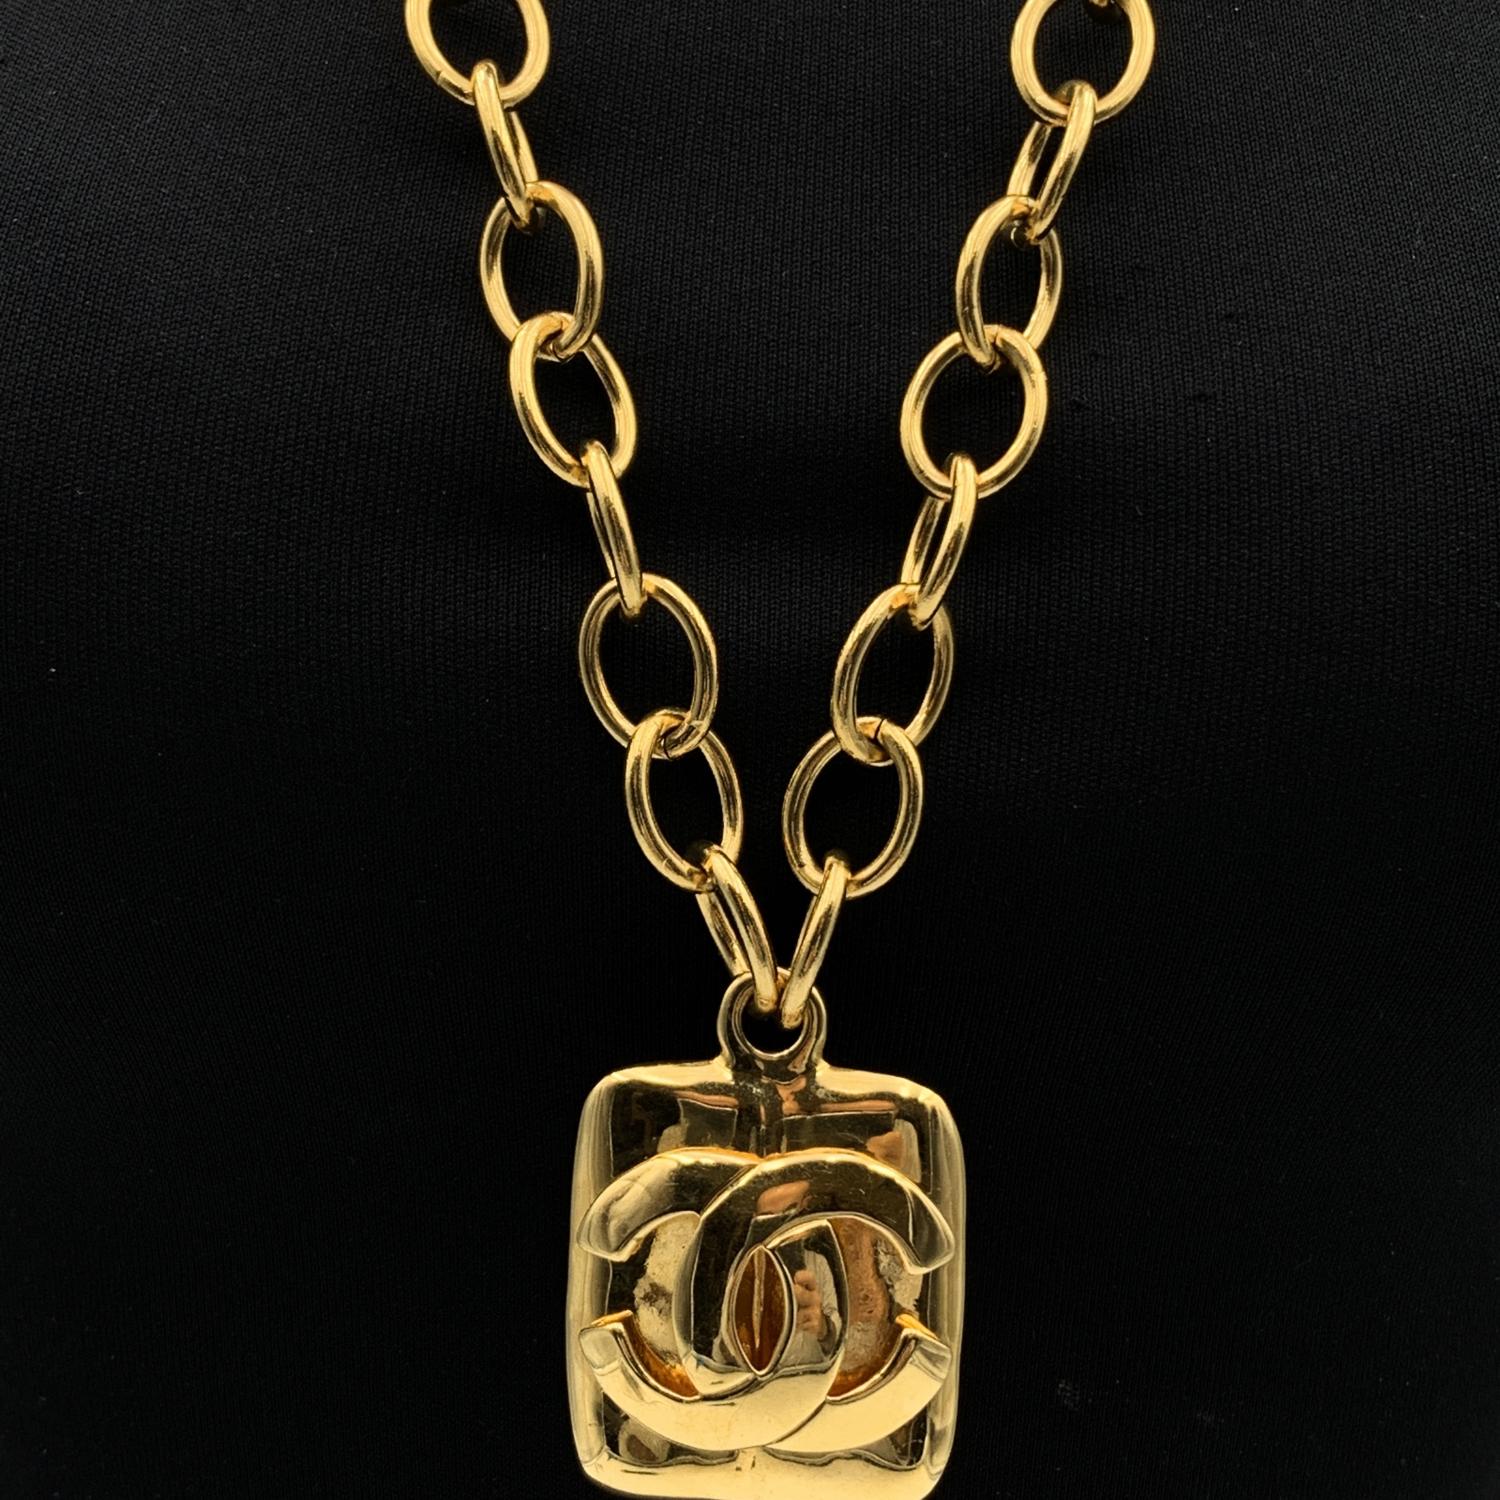 Gold metal chunky chain necklace by CHANEL. CC - CHANEL logo pendant. Rectangle-shaped pendant. Spring ring closure. Total length of the chain: 27.5 inches - 70 cm 'CHANEL 95 CC P - Made in France' oval mark on the reverse of the